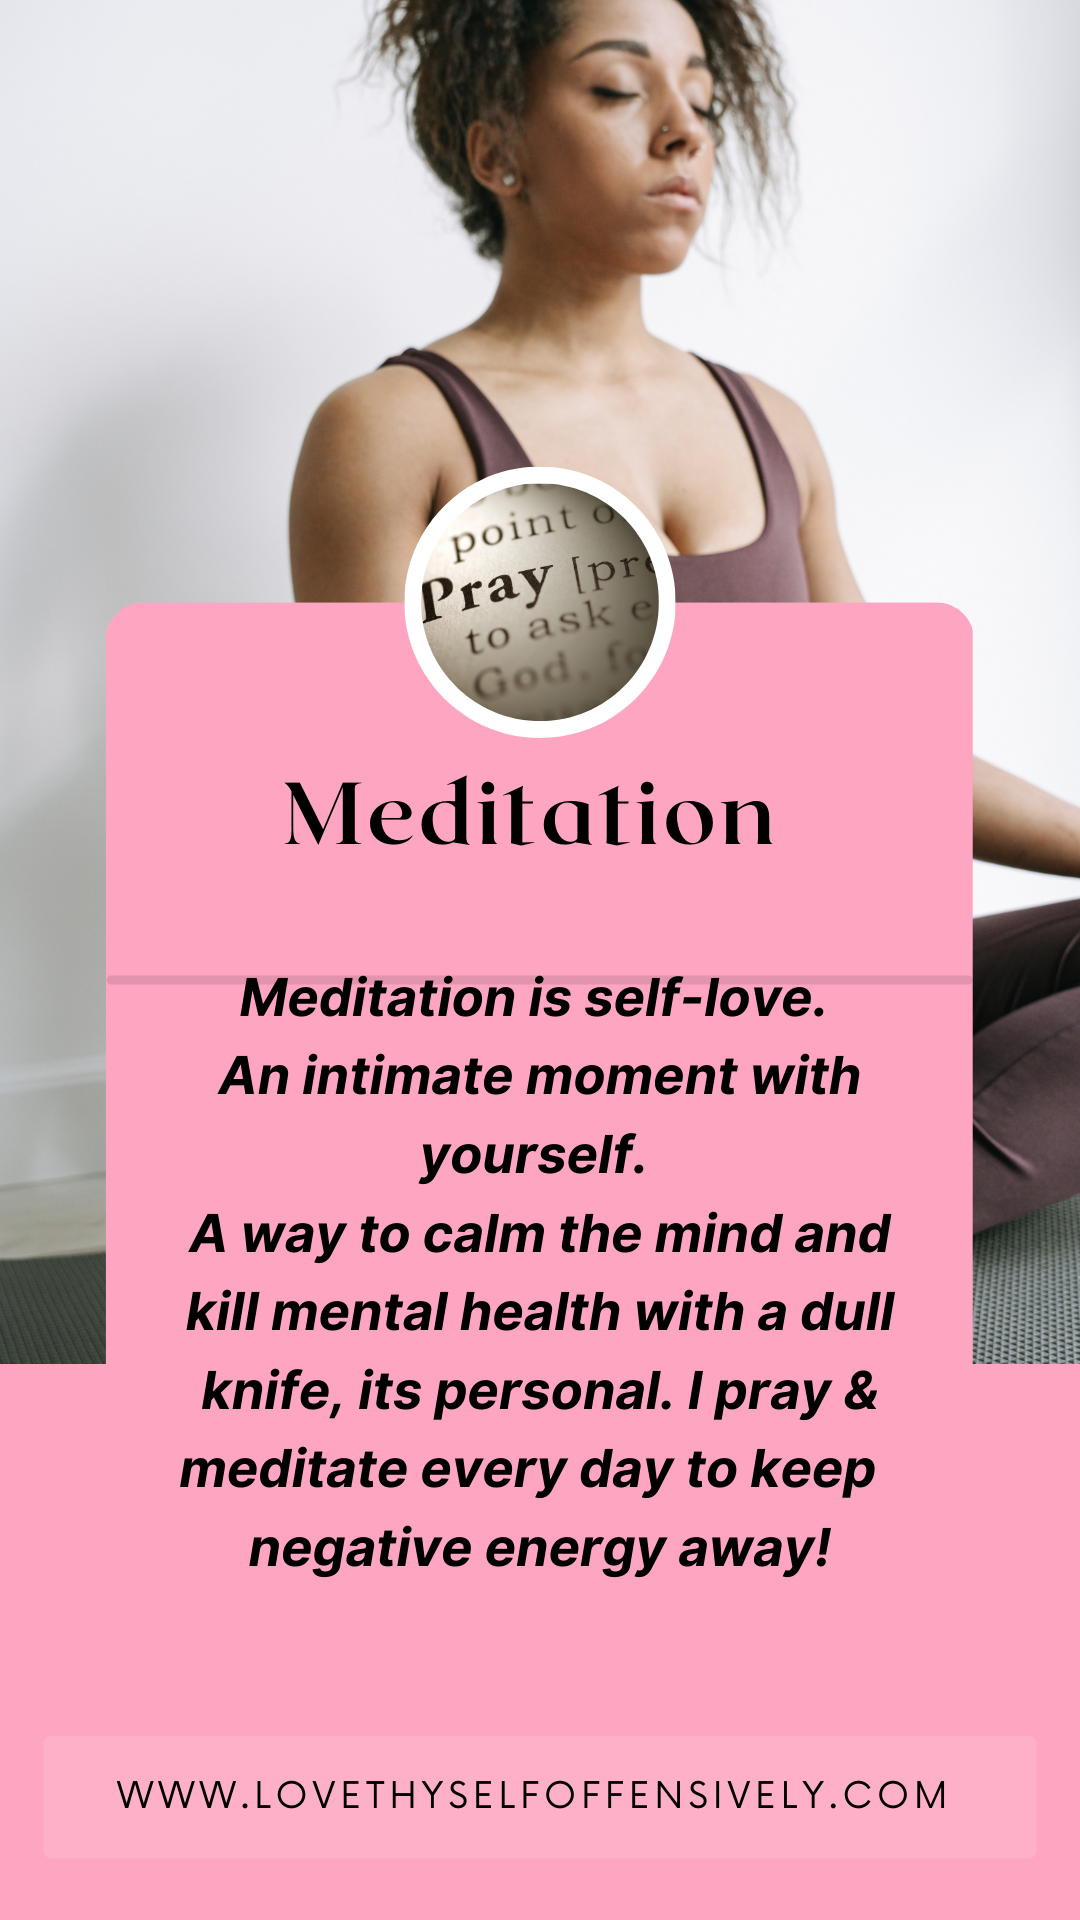 Meditate Your Daily Stress Away "A self-love journey"